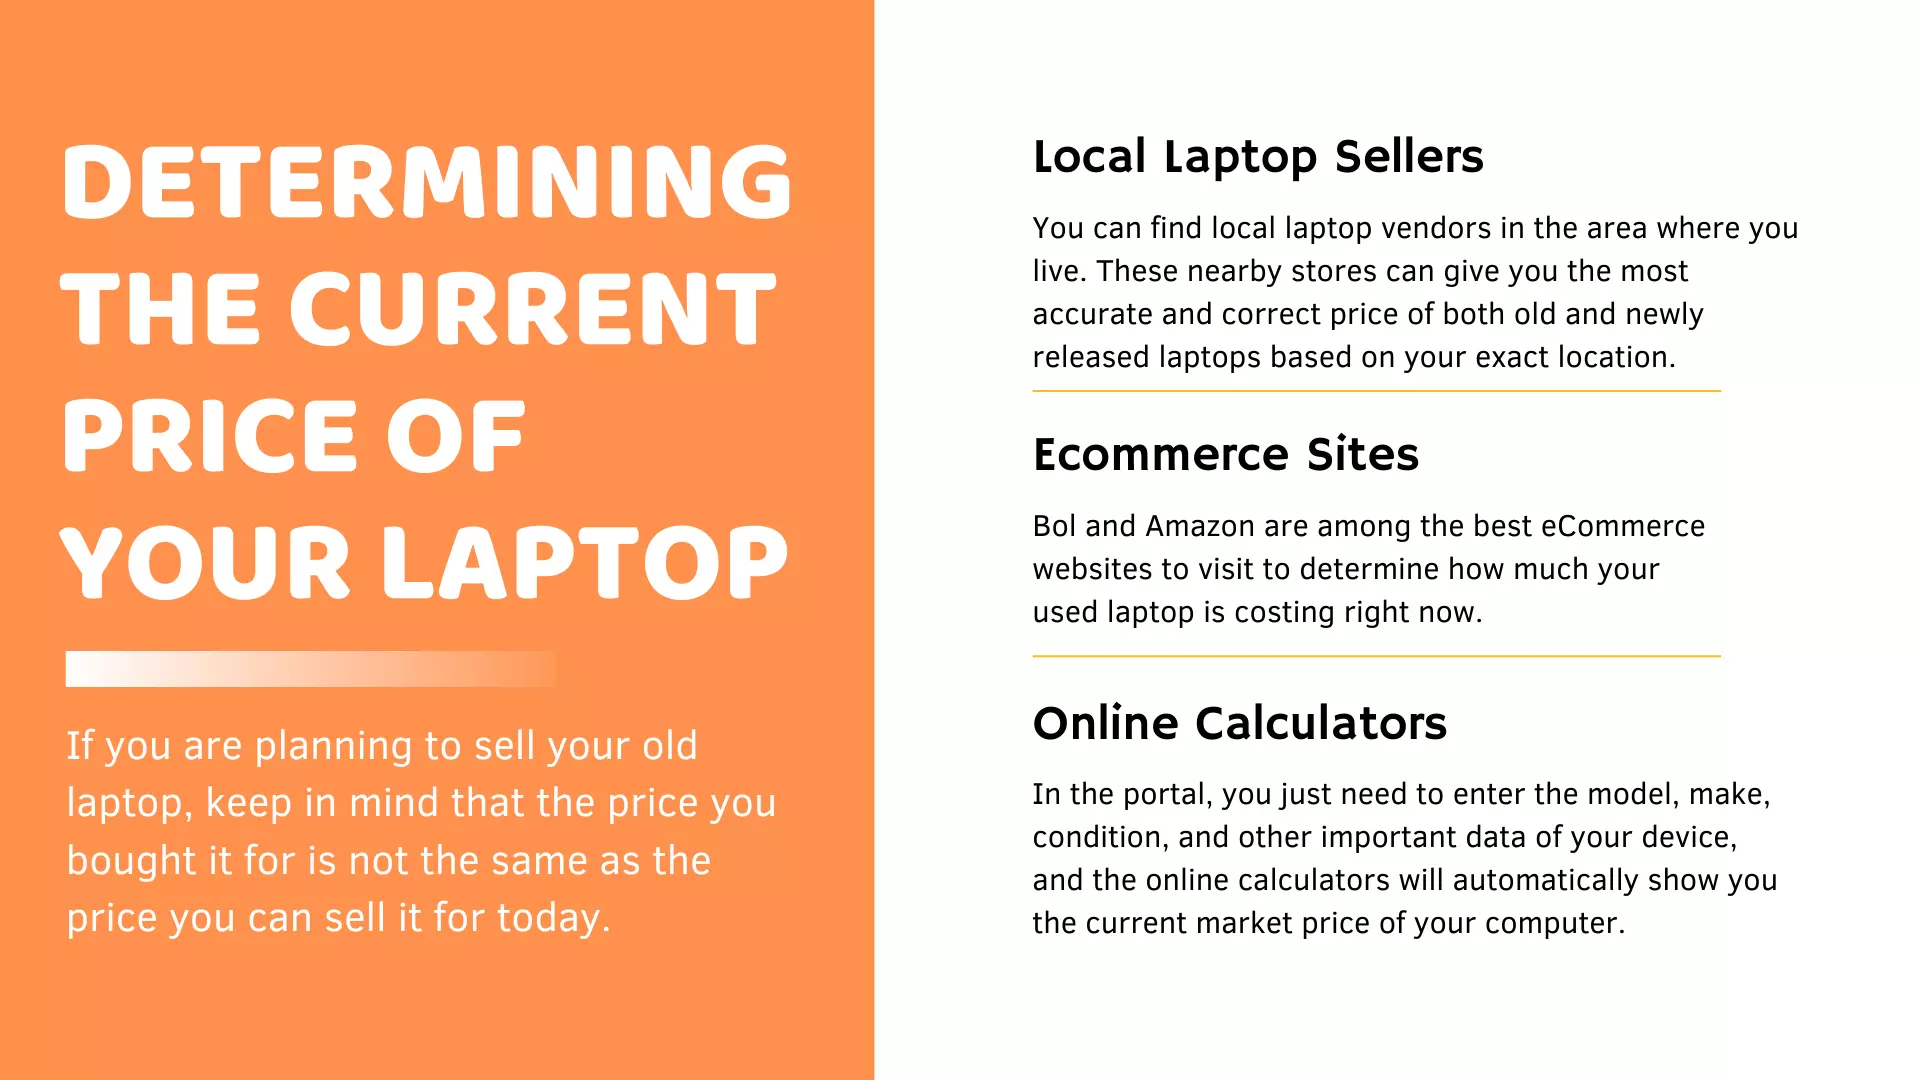 Determining the current price of your laptop